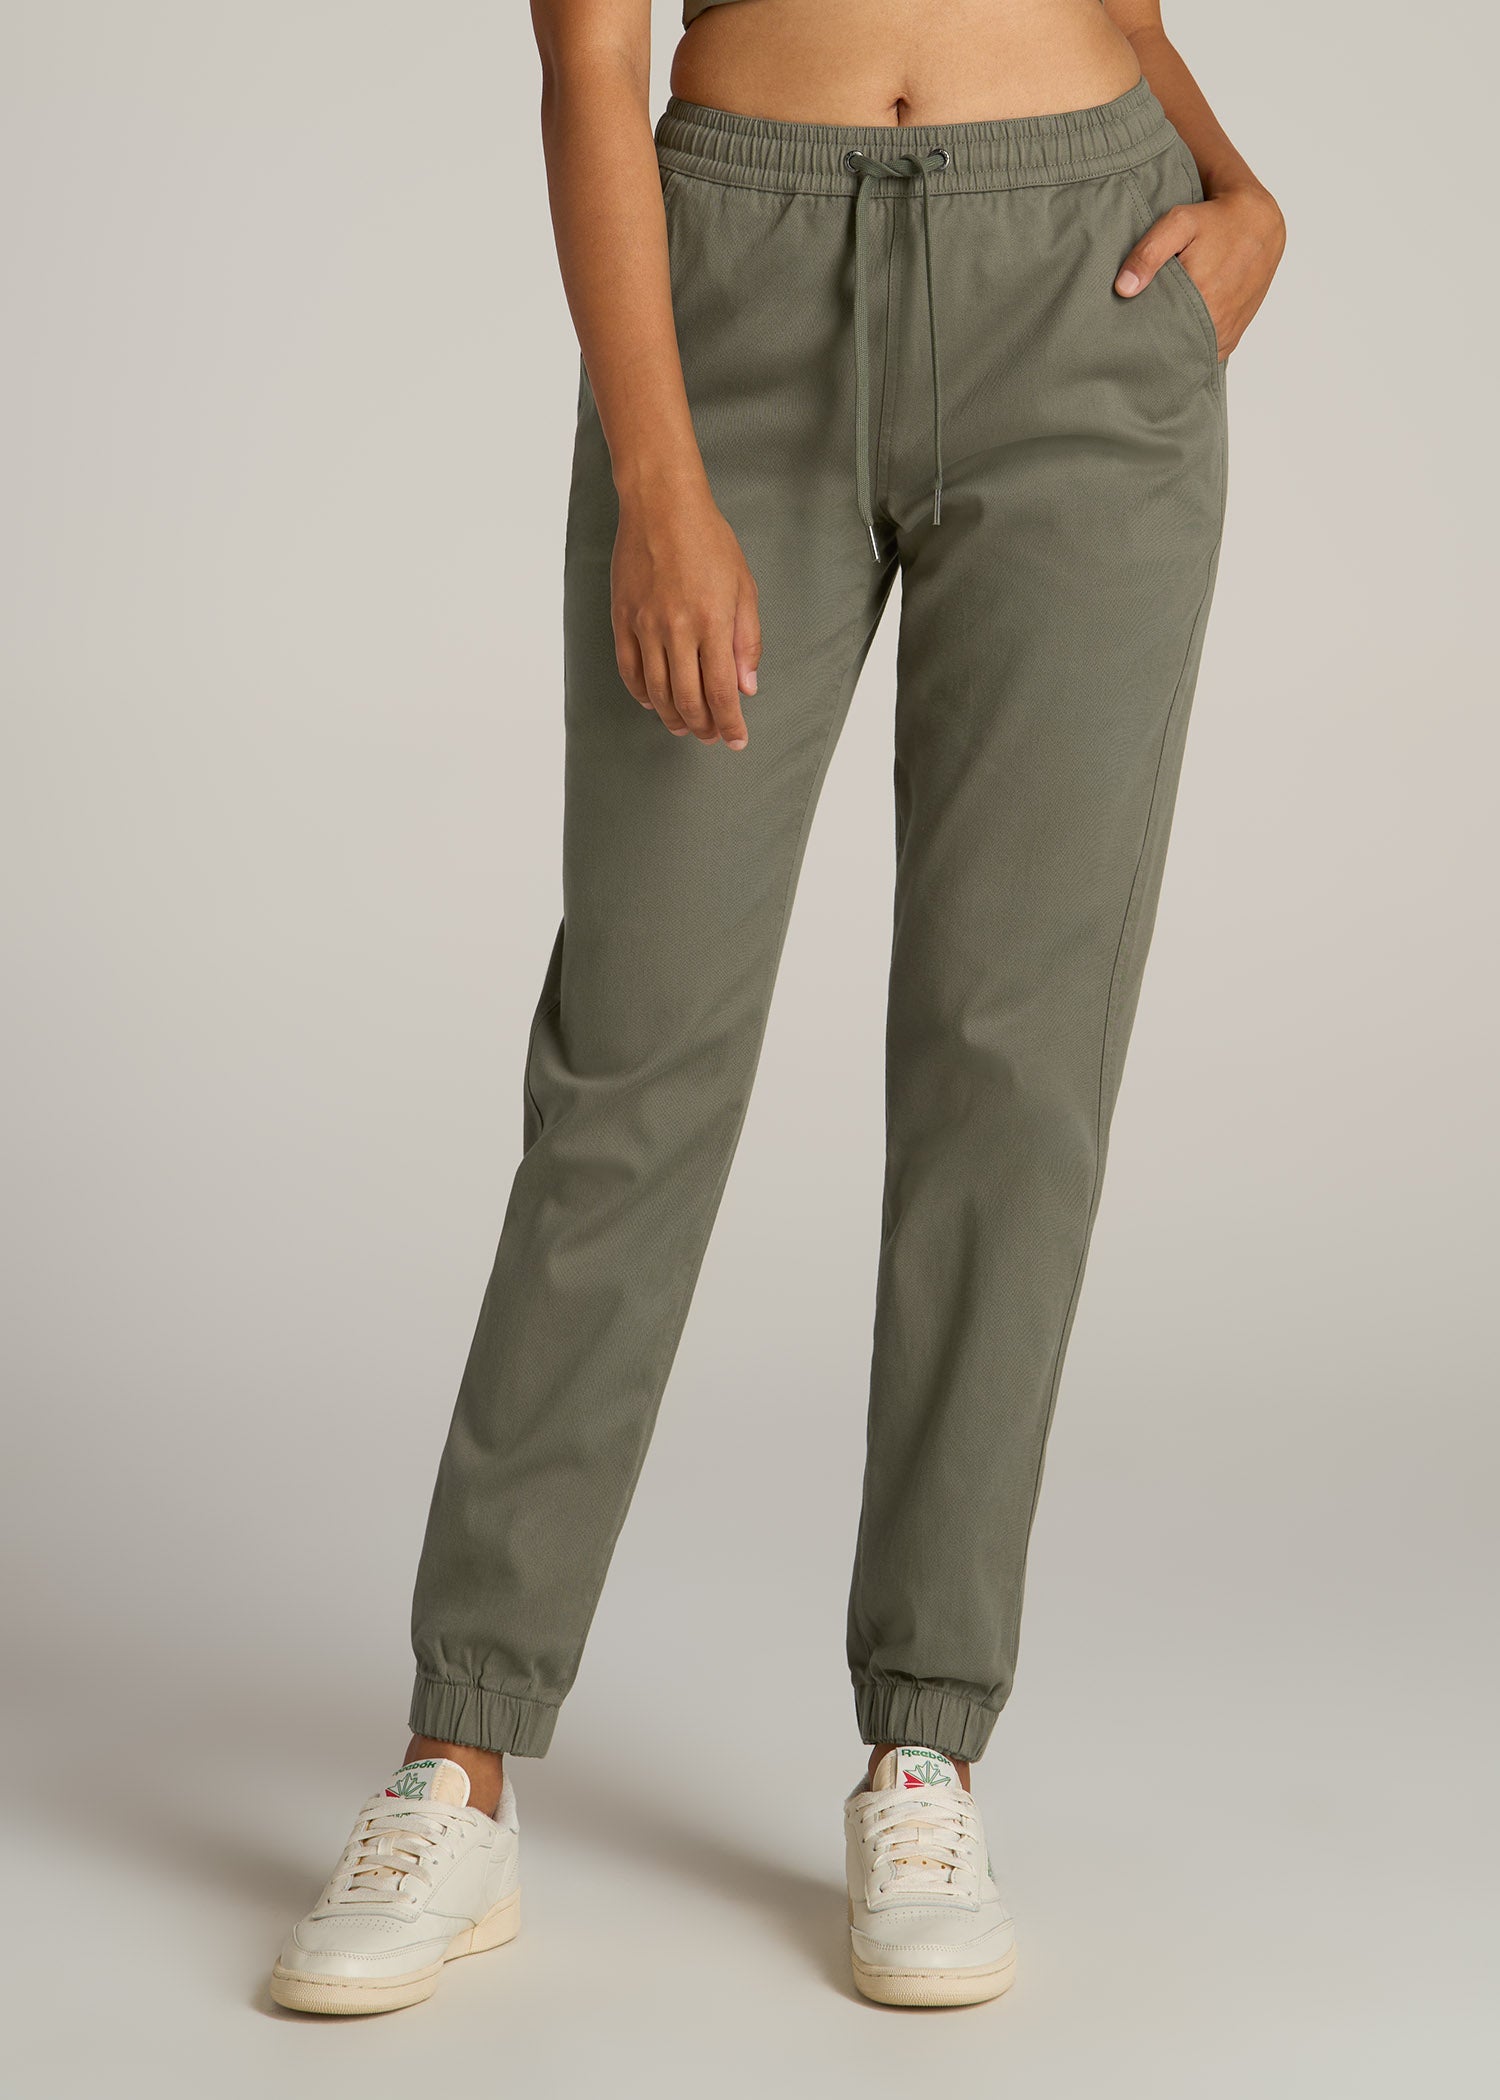 Twill Cotton Pants - Olive Green